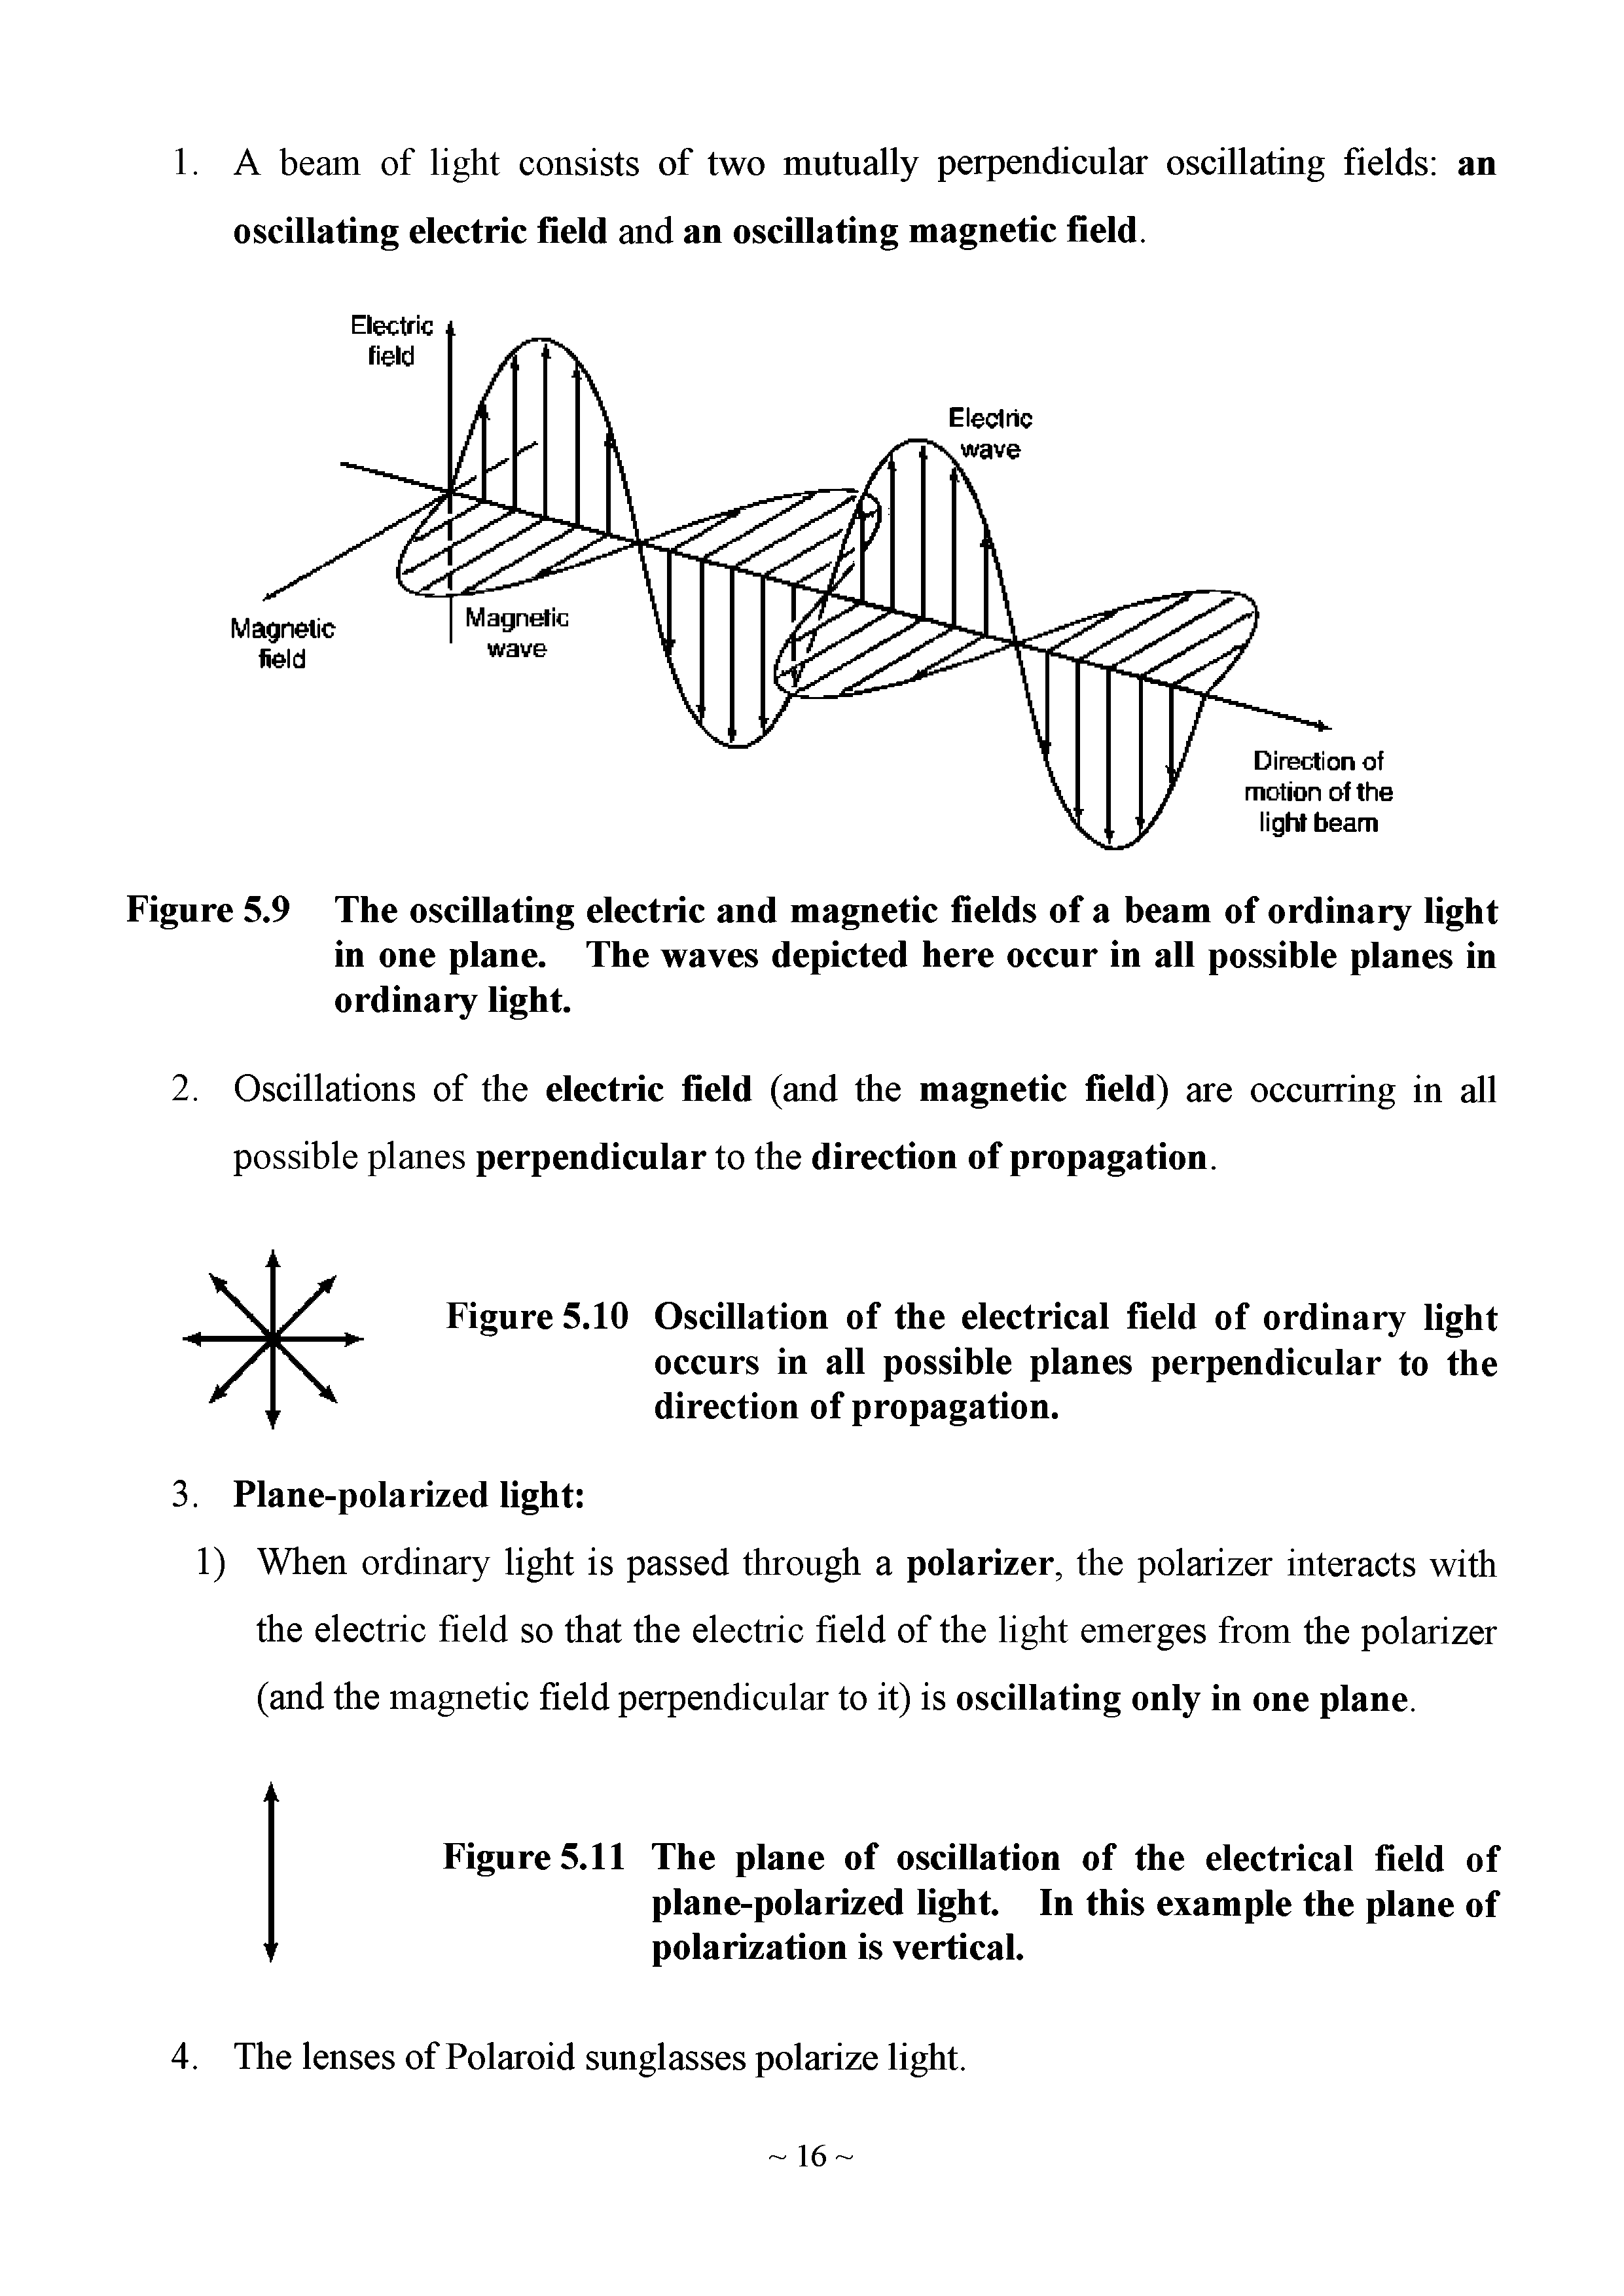 Figure 5.11 The plane of oscillation of the electrical field of plane-polarized light. In this example the plane of polarization is vertical.